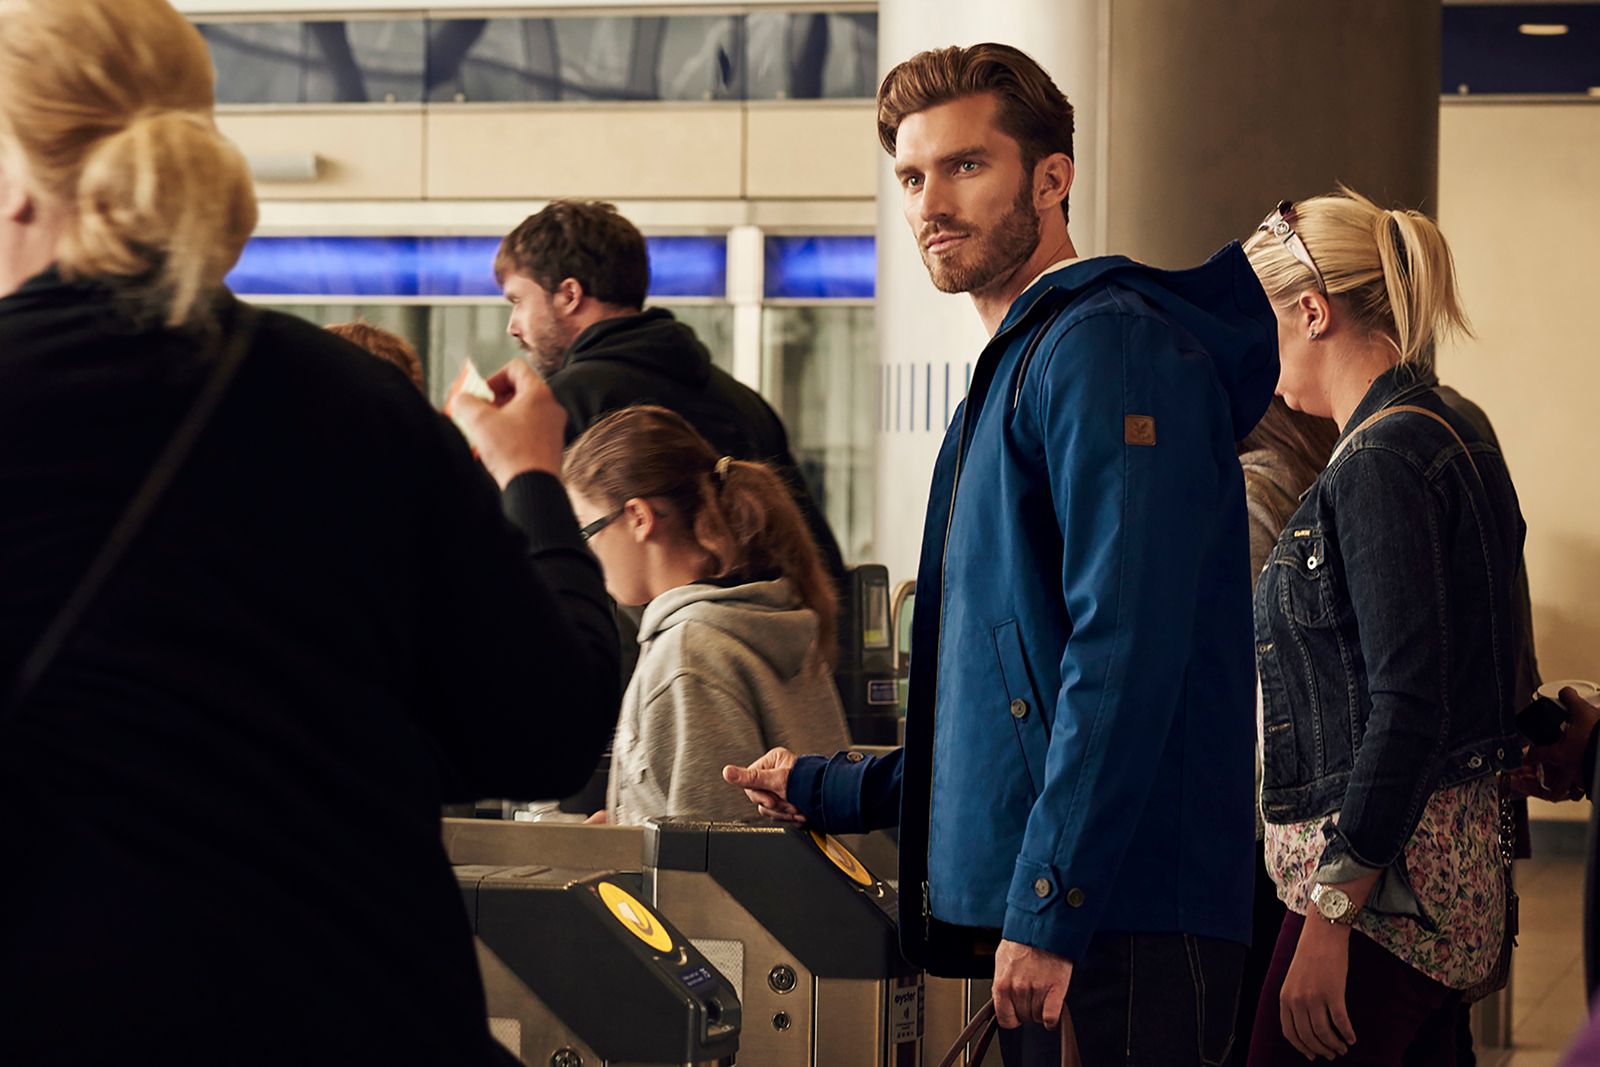 lyle scott unveils a contactless payment jacket in cahoots with barclays bpay image 2